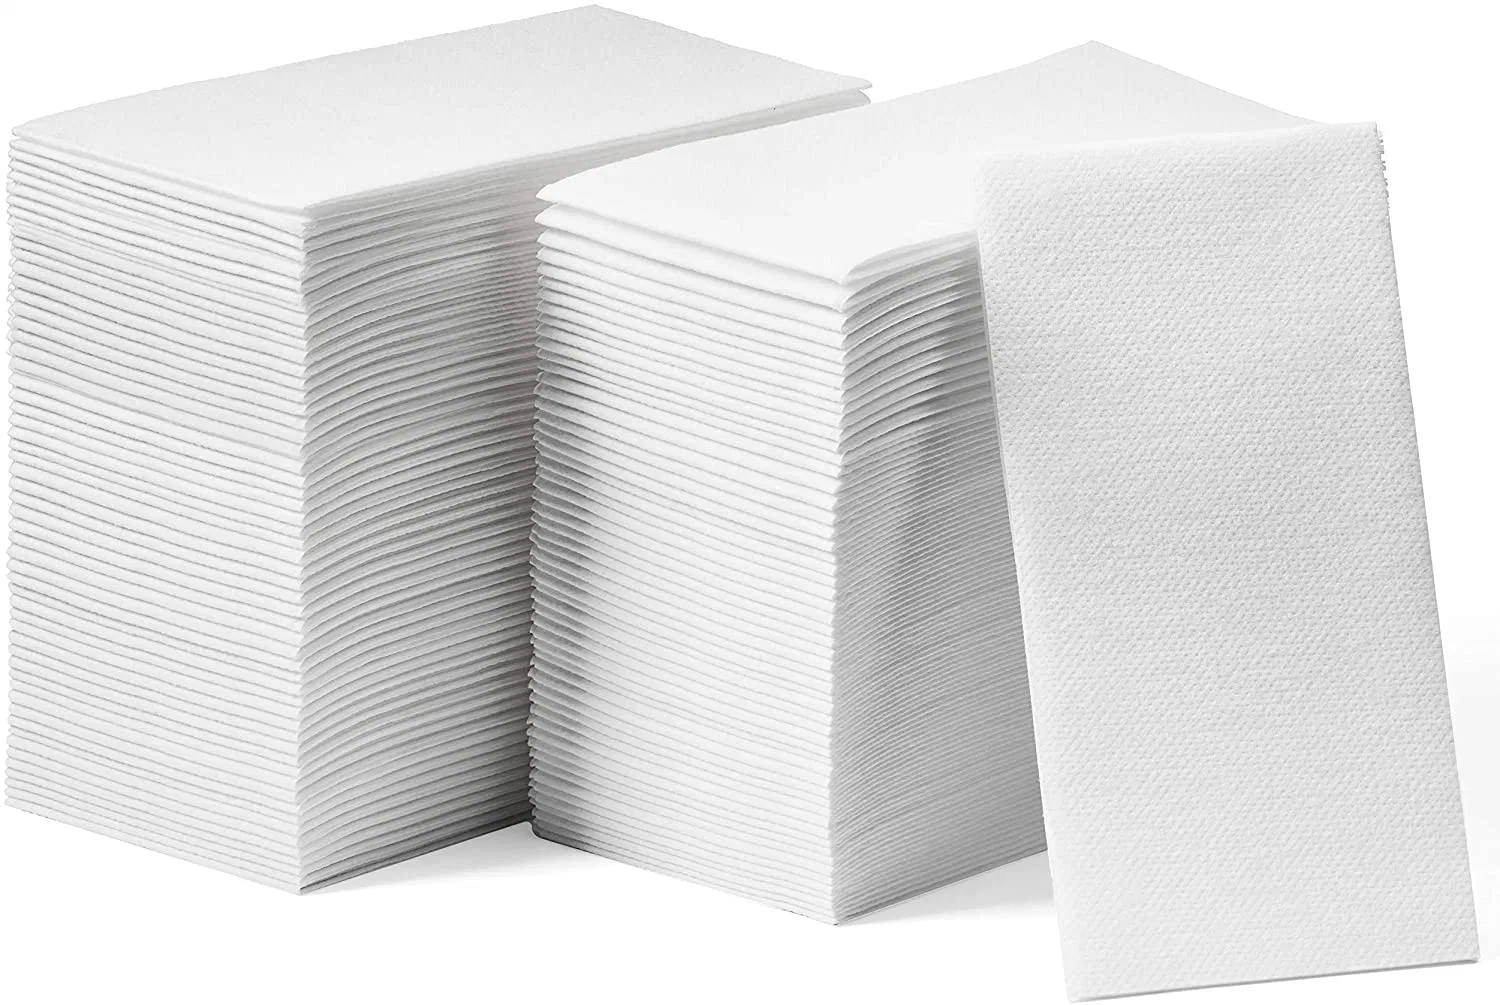 Lintext Disposable Linen-Feel Guest Towels - 12" x 17" Cloth-Like Hand Towels - Soft And Absorbent Paper Napkin For Bathroom, Kitchen [Extra-Soft - Pack of 200]